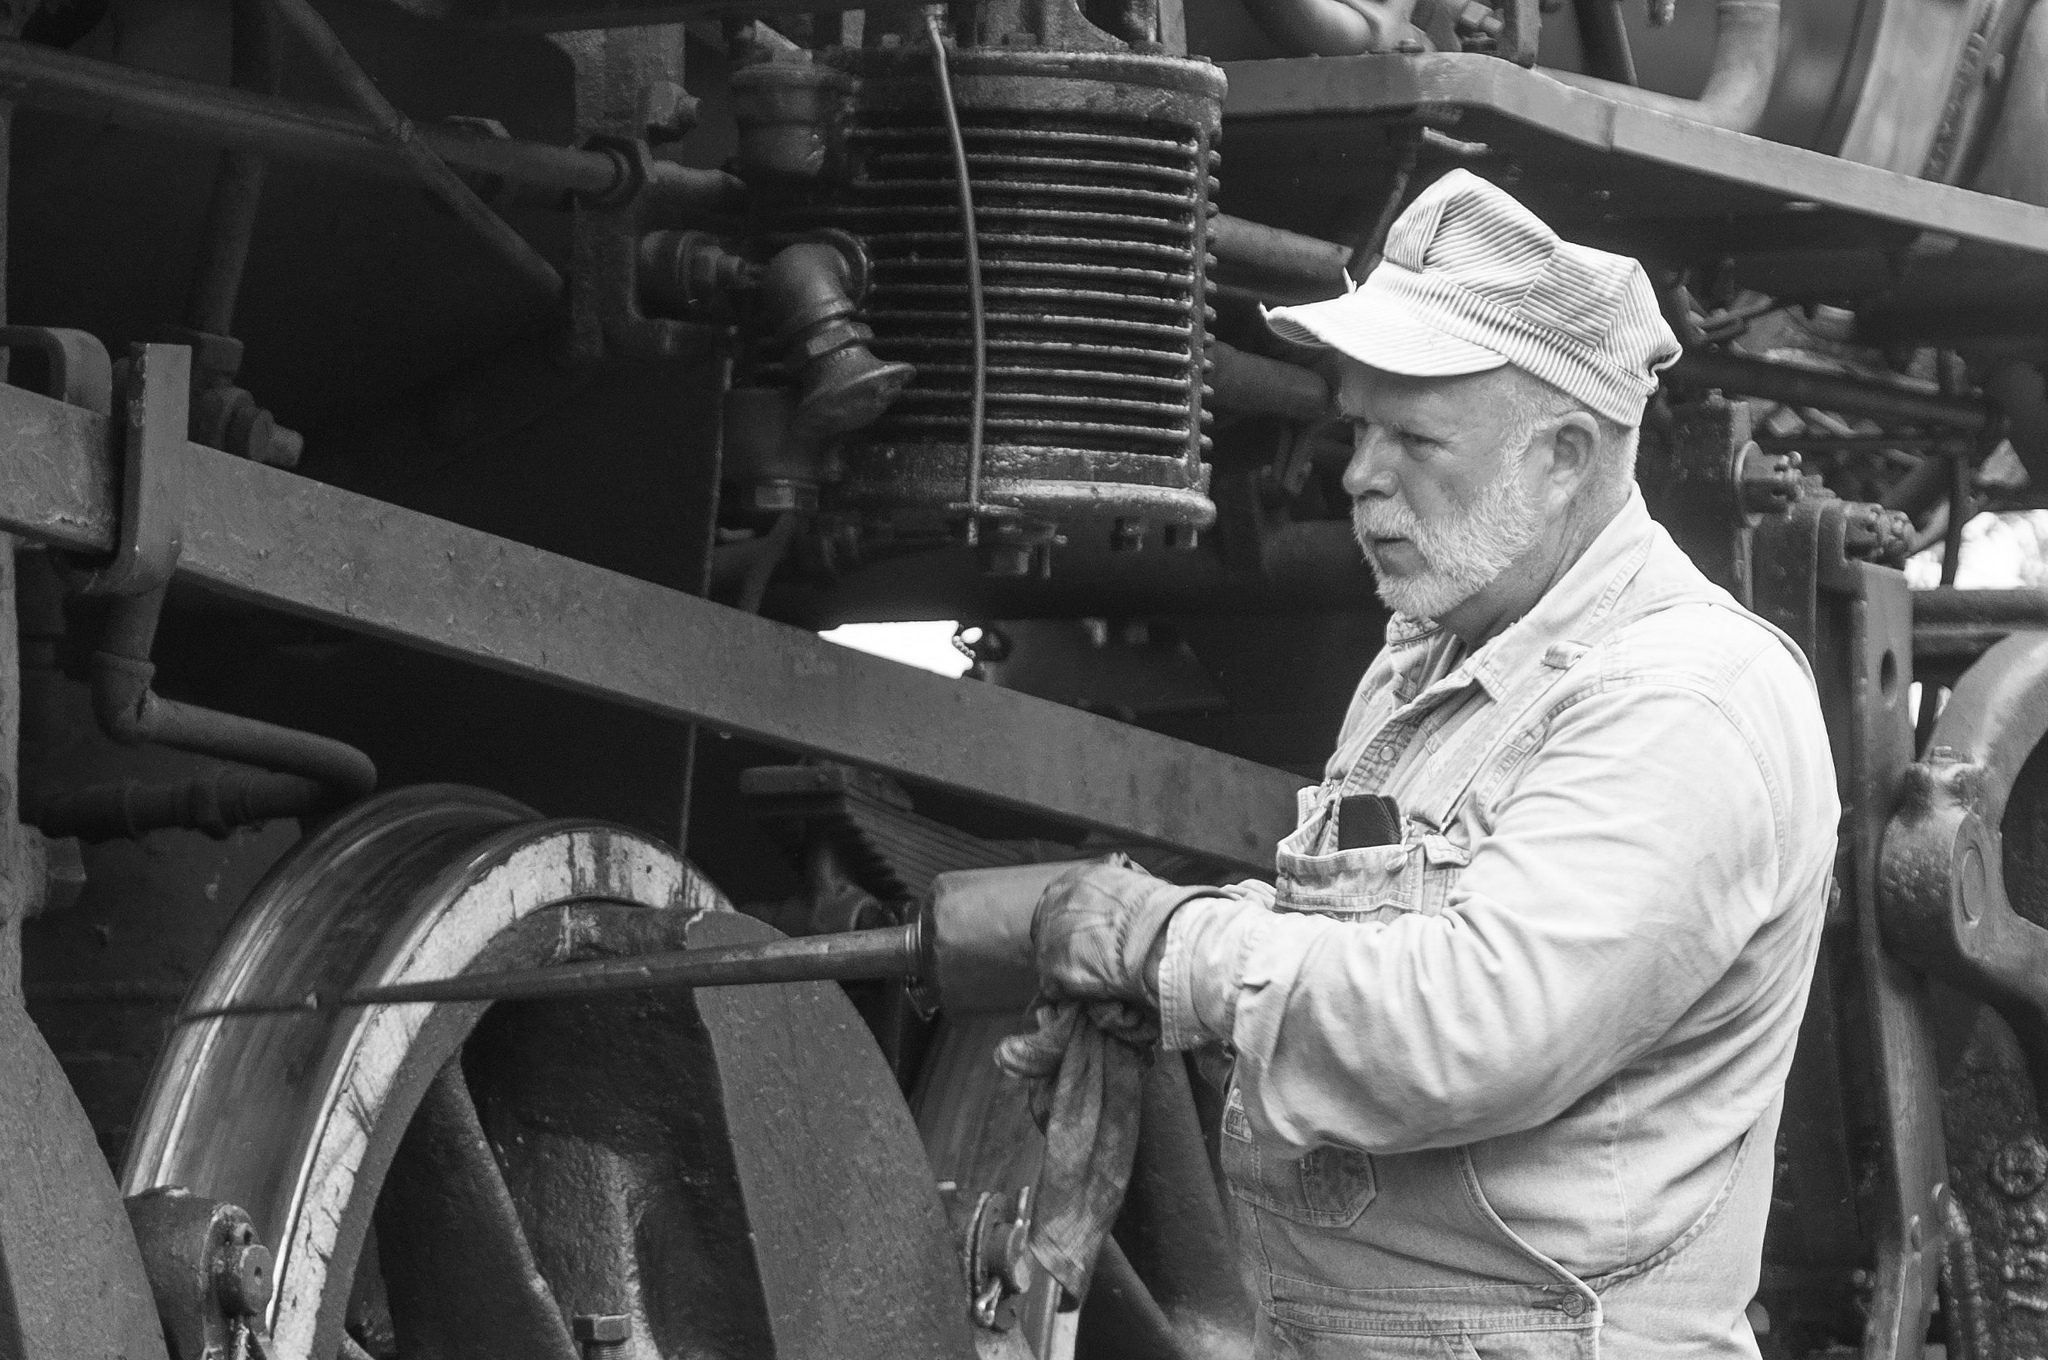 An old railroad engineer tuning up a locomotive, published as part of "Complete Guide to Launching a WordPress Site: Part 2 (Maintenance)" and "The Complete Guide to Content Marketing for Small Business, Part 3: Improving Over Time"